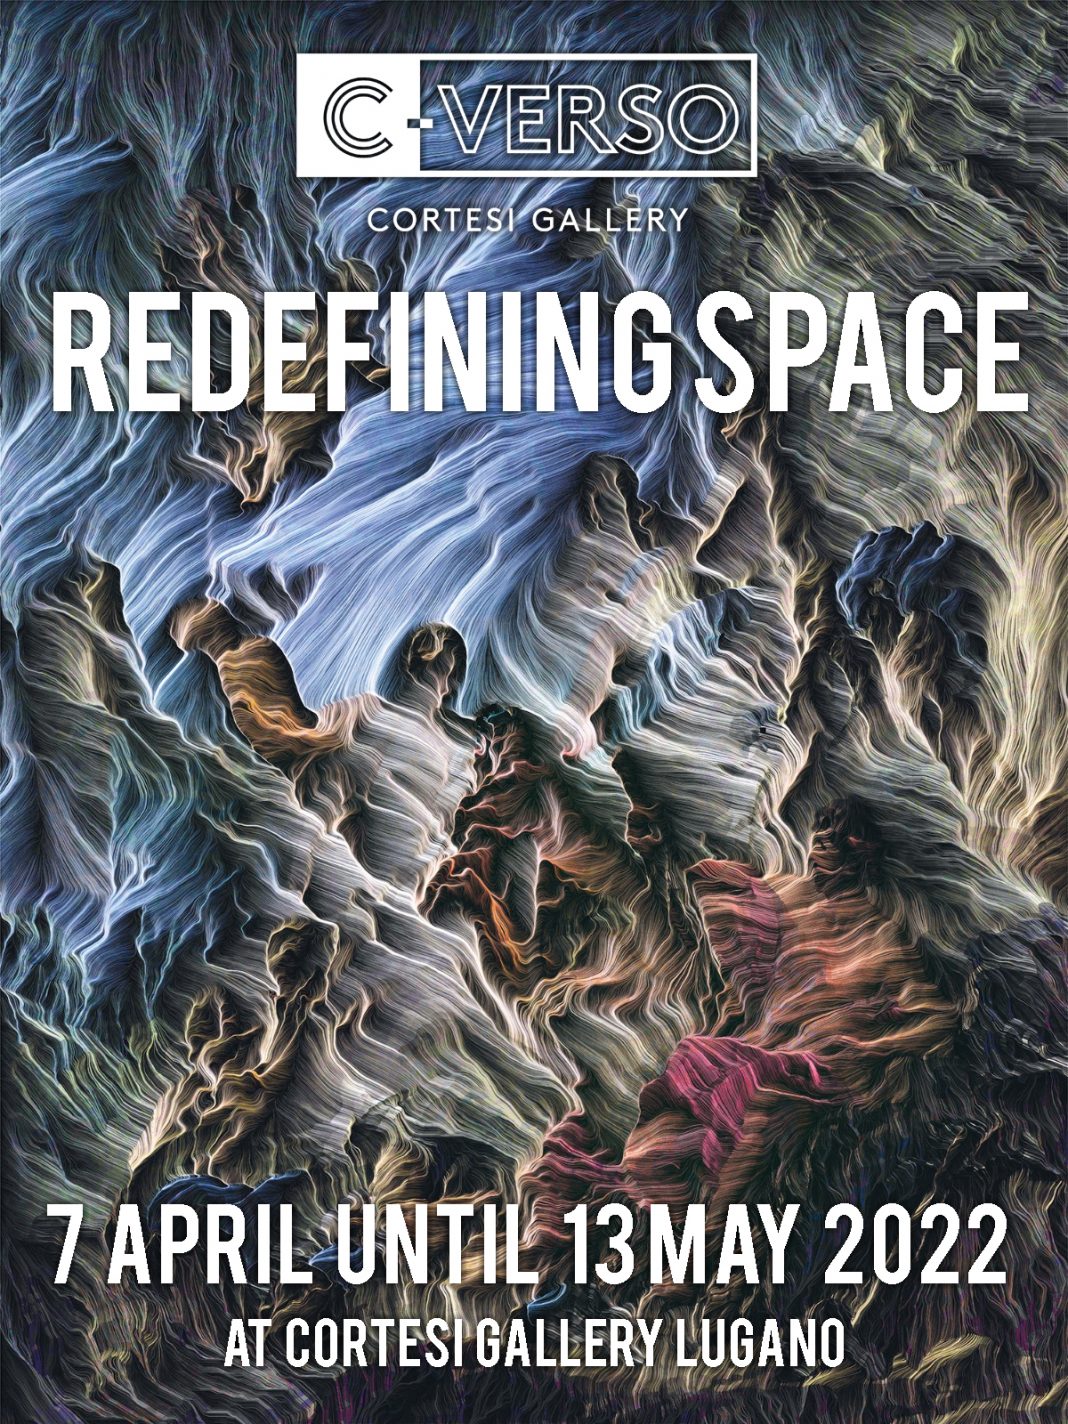 Redefining Spacehttps://www.exibart.com/repository/media/2022/04/Redefining-Space-Invite-1068x1424.jpg